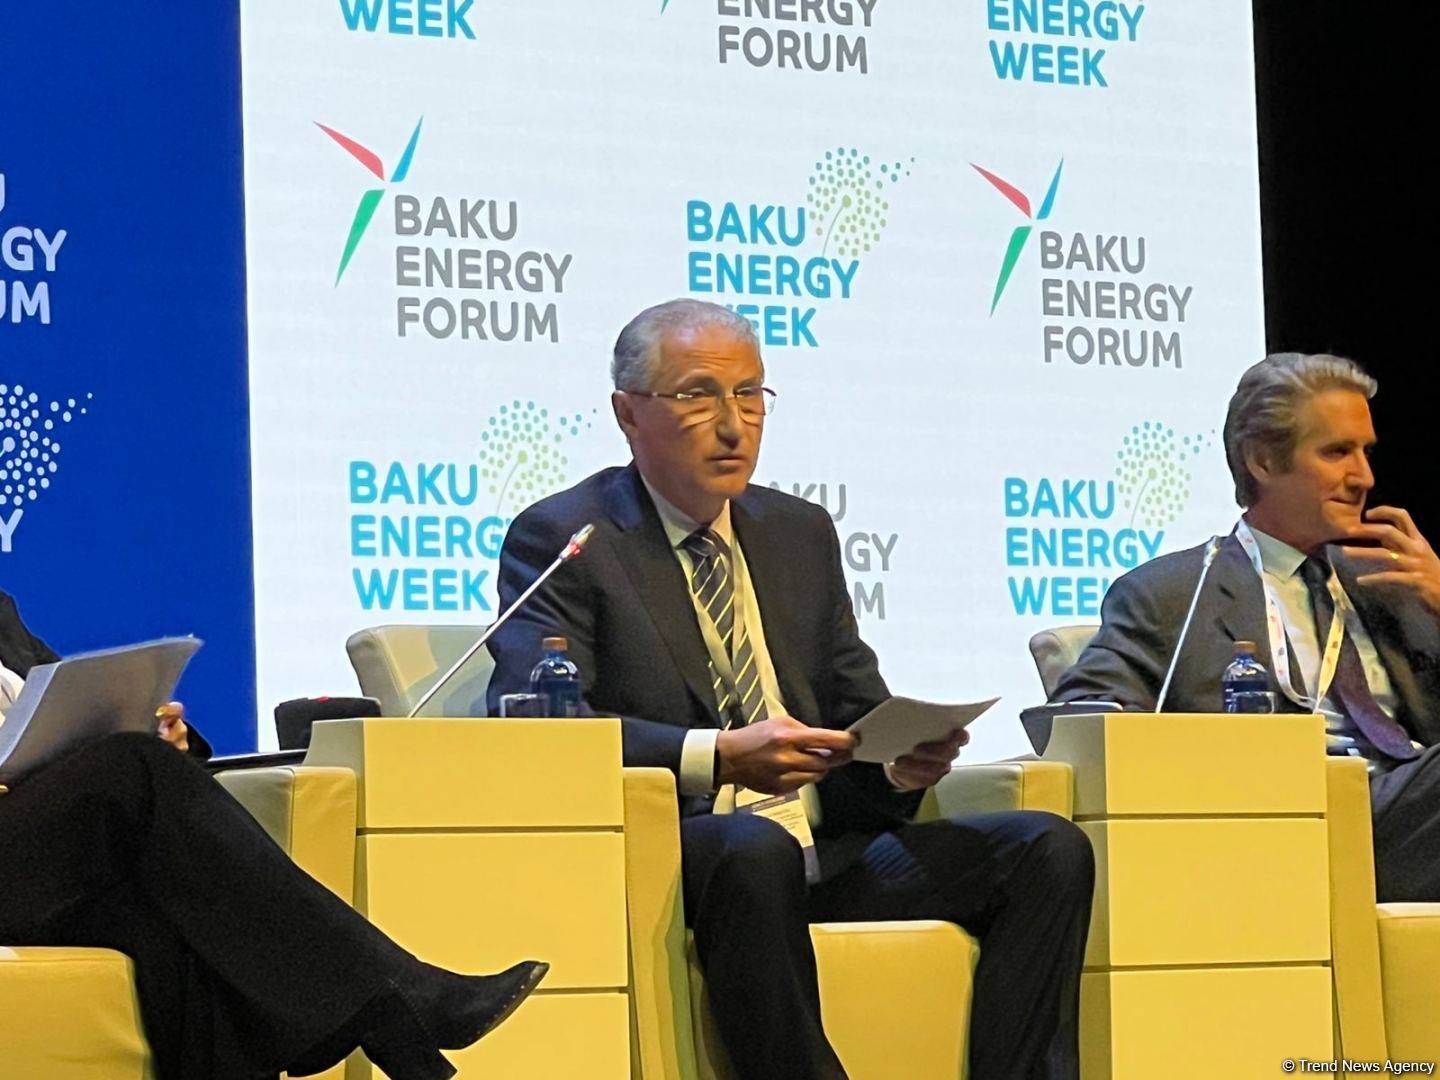 Azerbaijan to implement ‘green’ projects aimed at increasing energy efficiency – minister